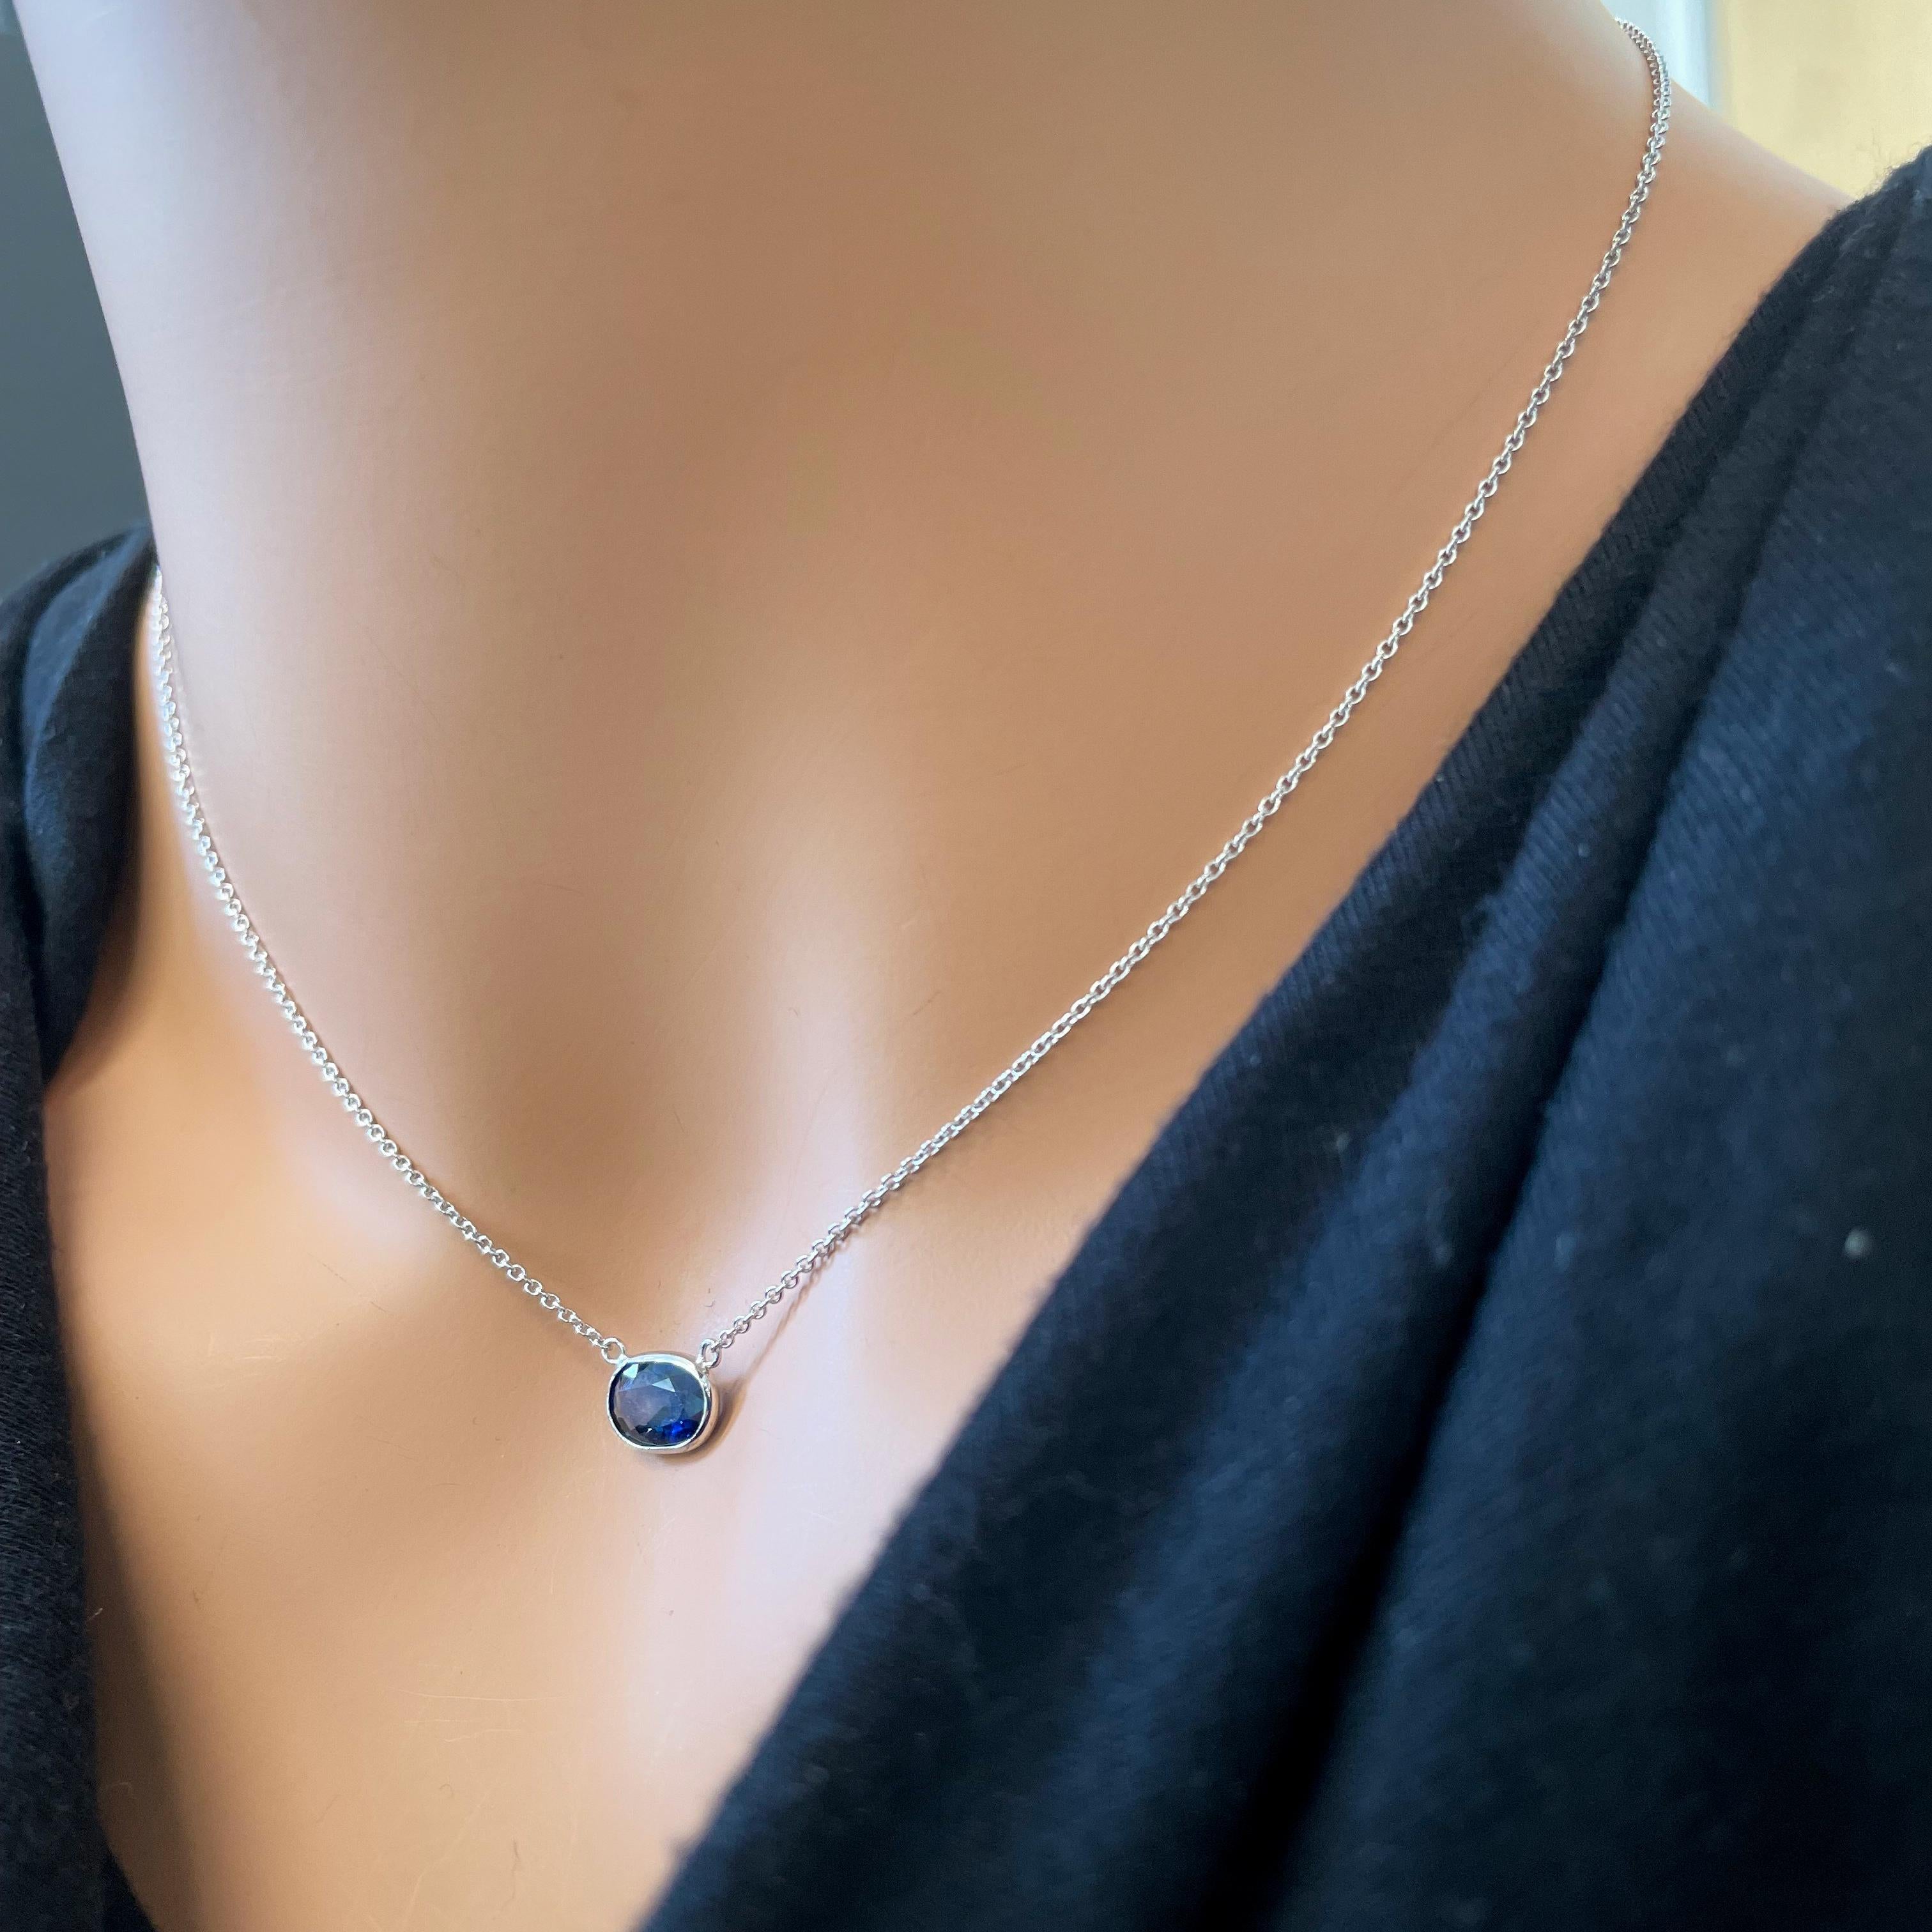 Oval Cut 1.97 Carat Blue Oval Sapphire Fashion Necklaces In 14K White Gold  For Sale